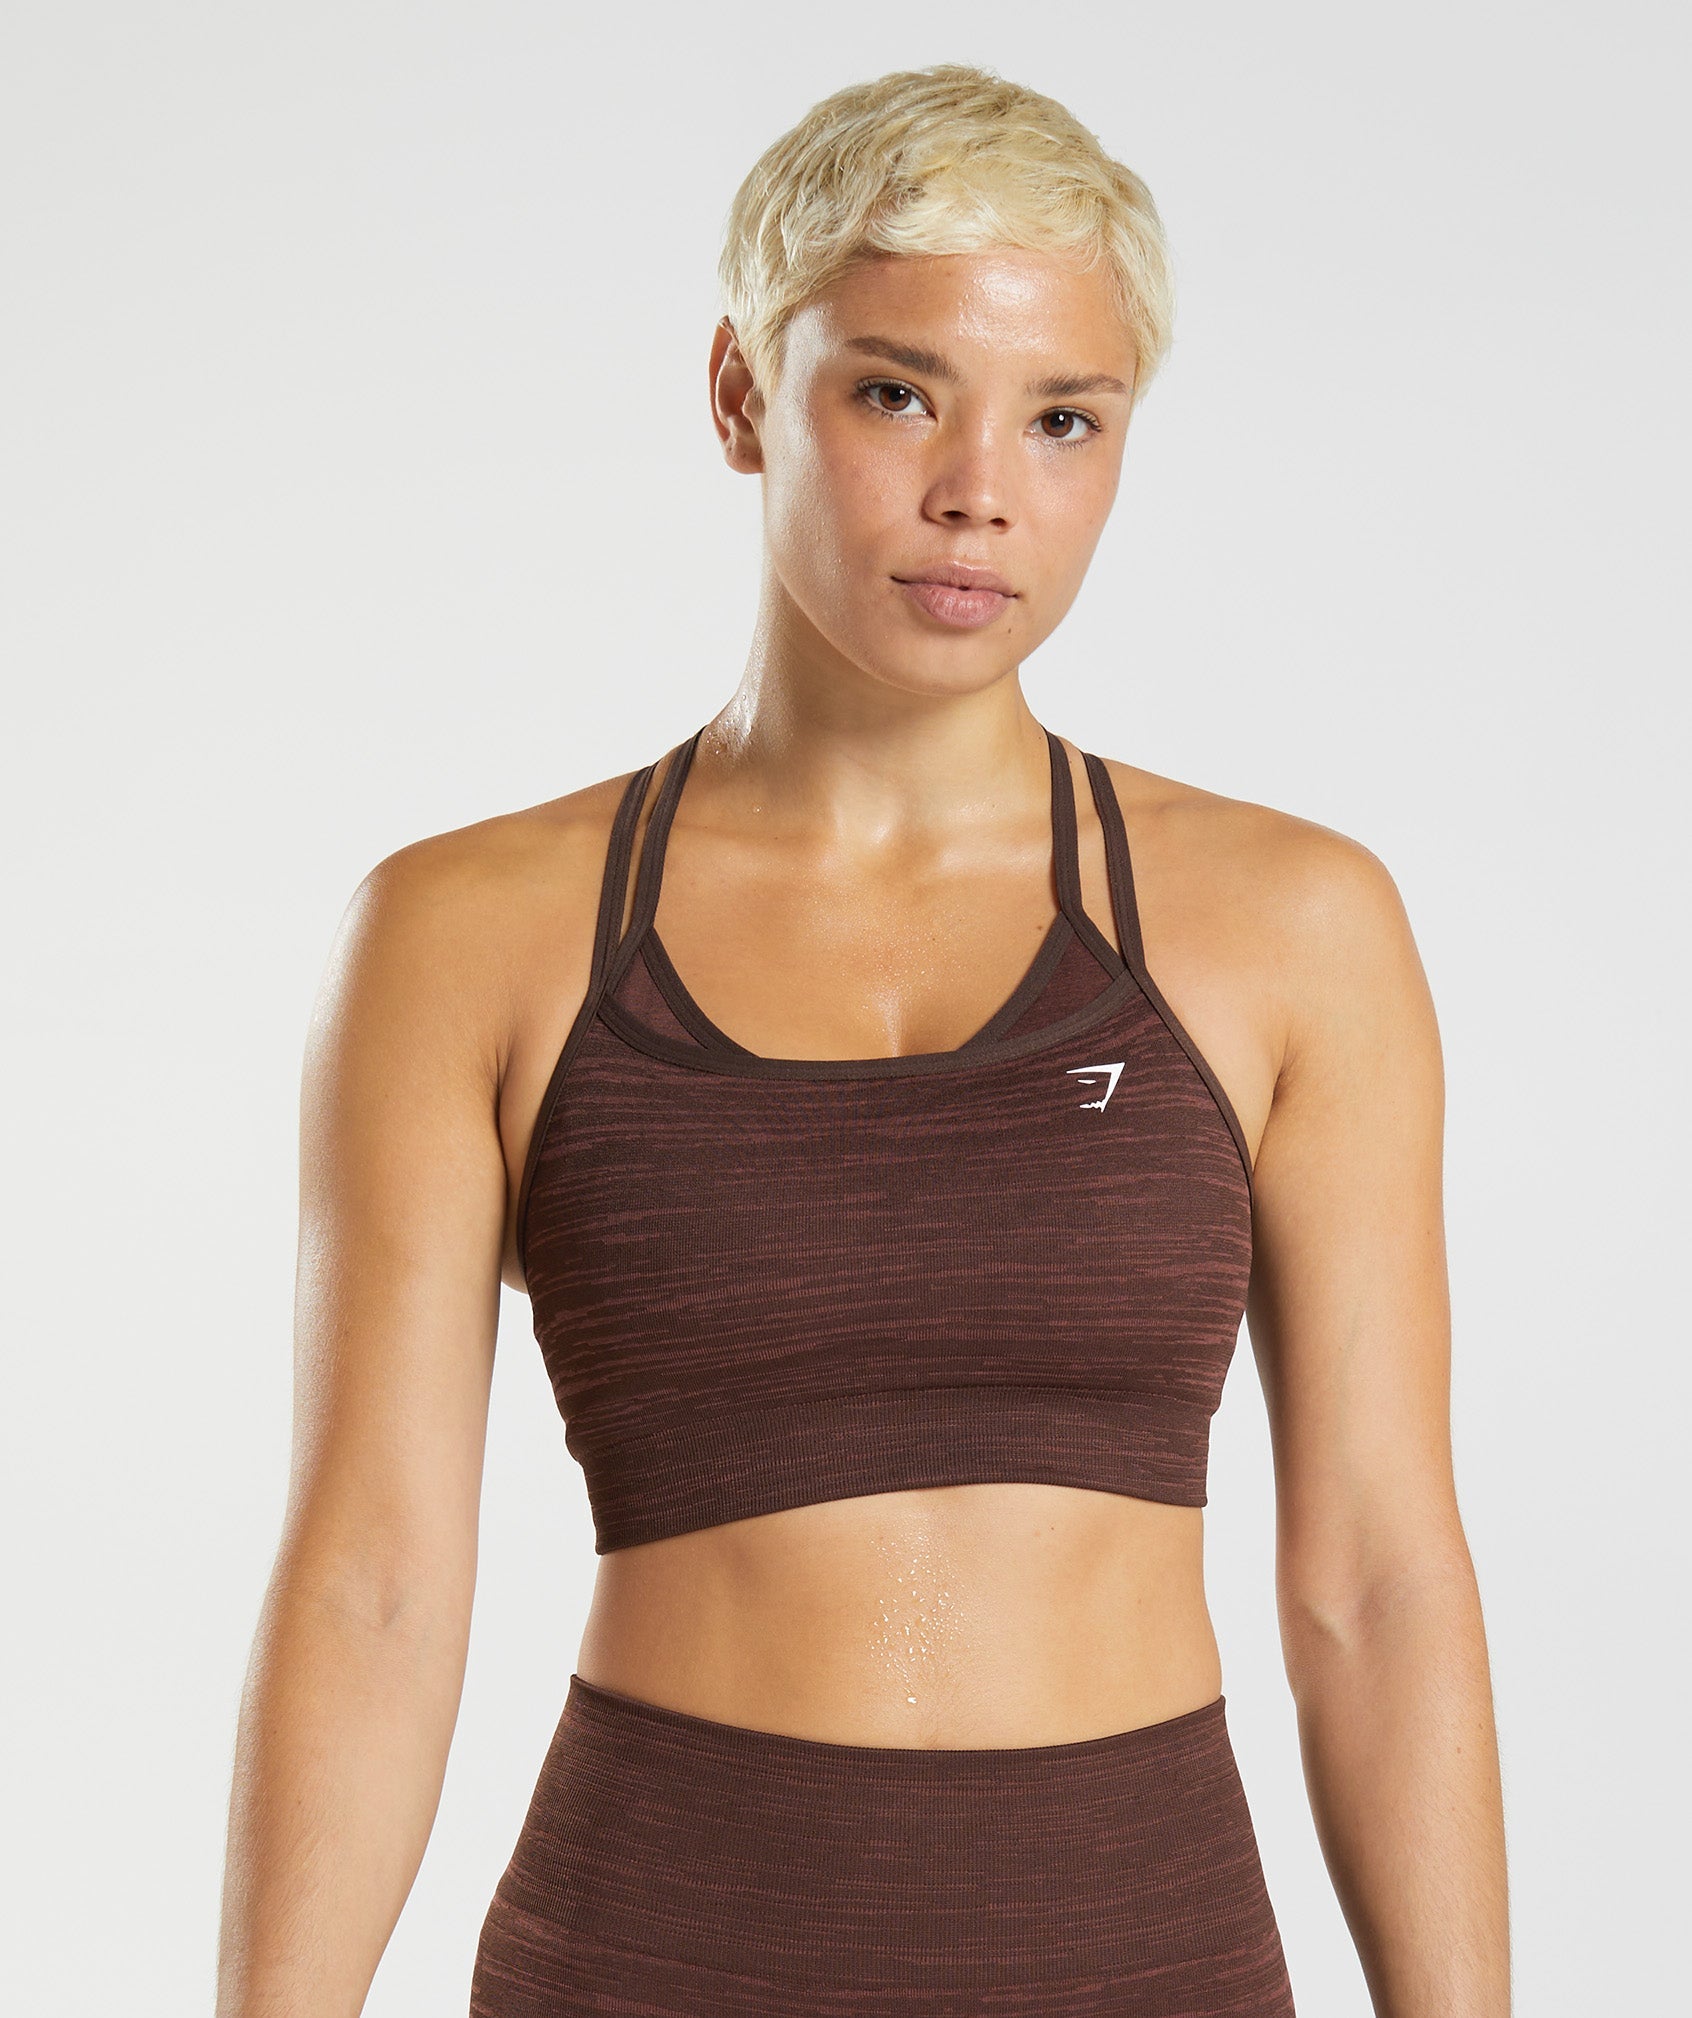 Adapt Marl Seamless Sports Bra in Archive Brown/Cherry Brown - view 1